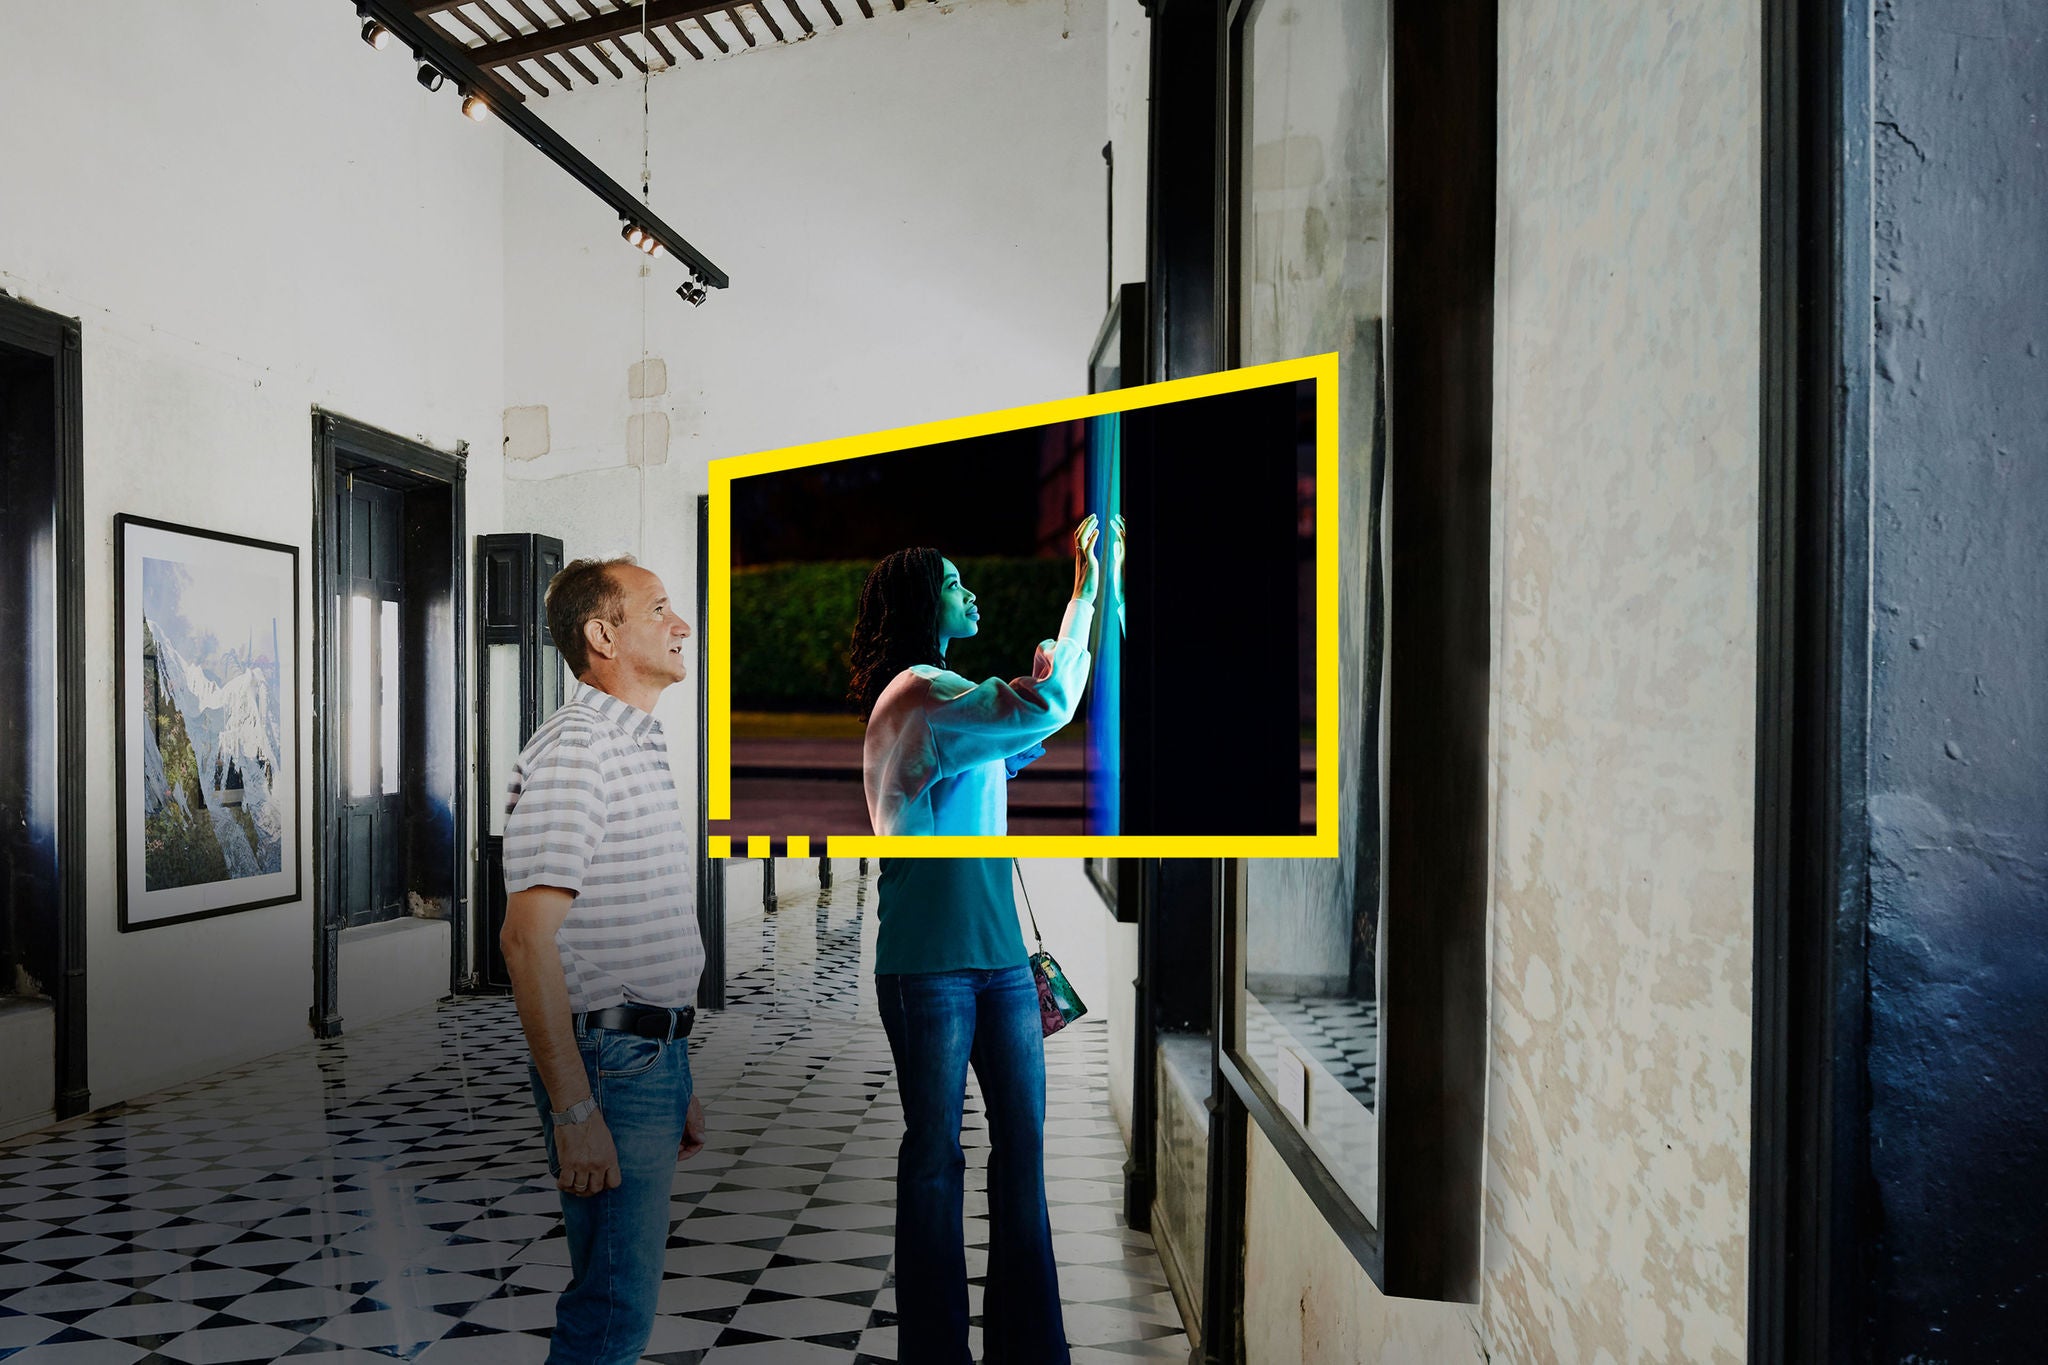 ey-reframe-your-future-art-gallery-touchscreen-static